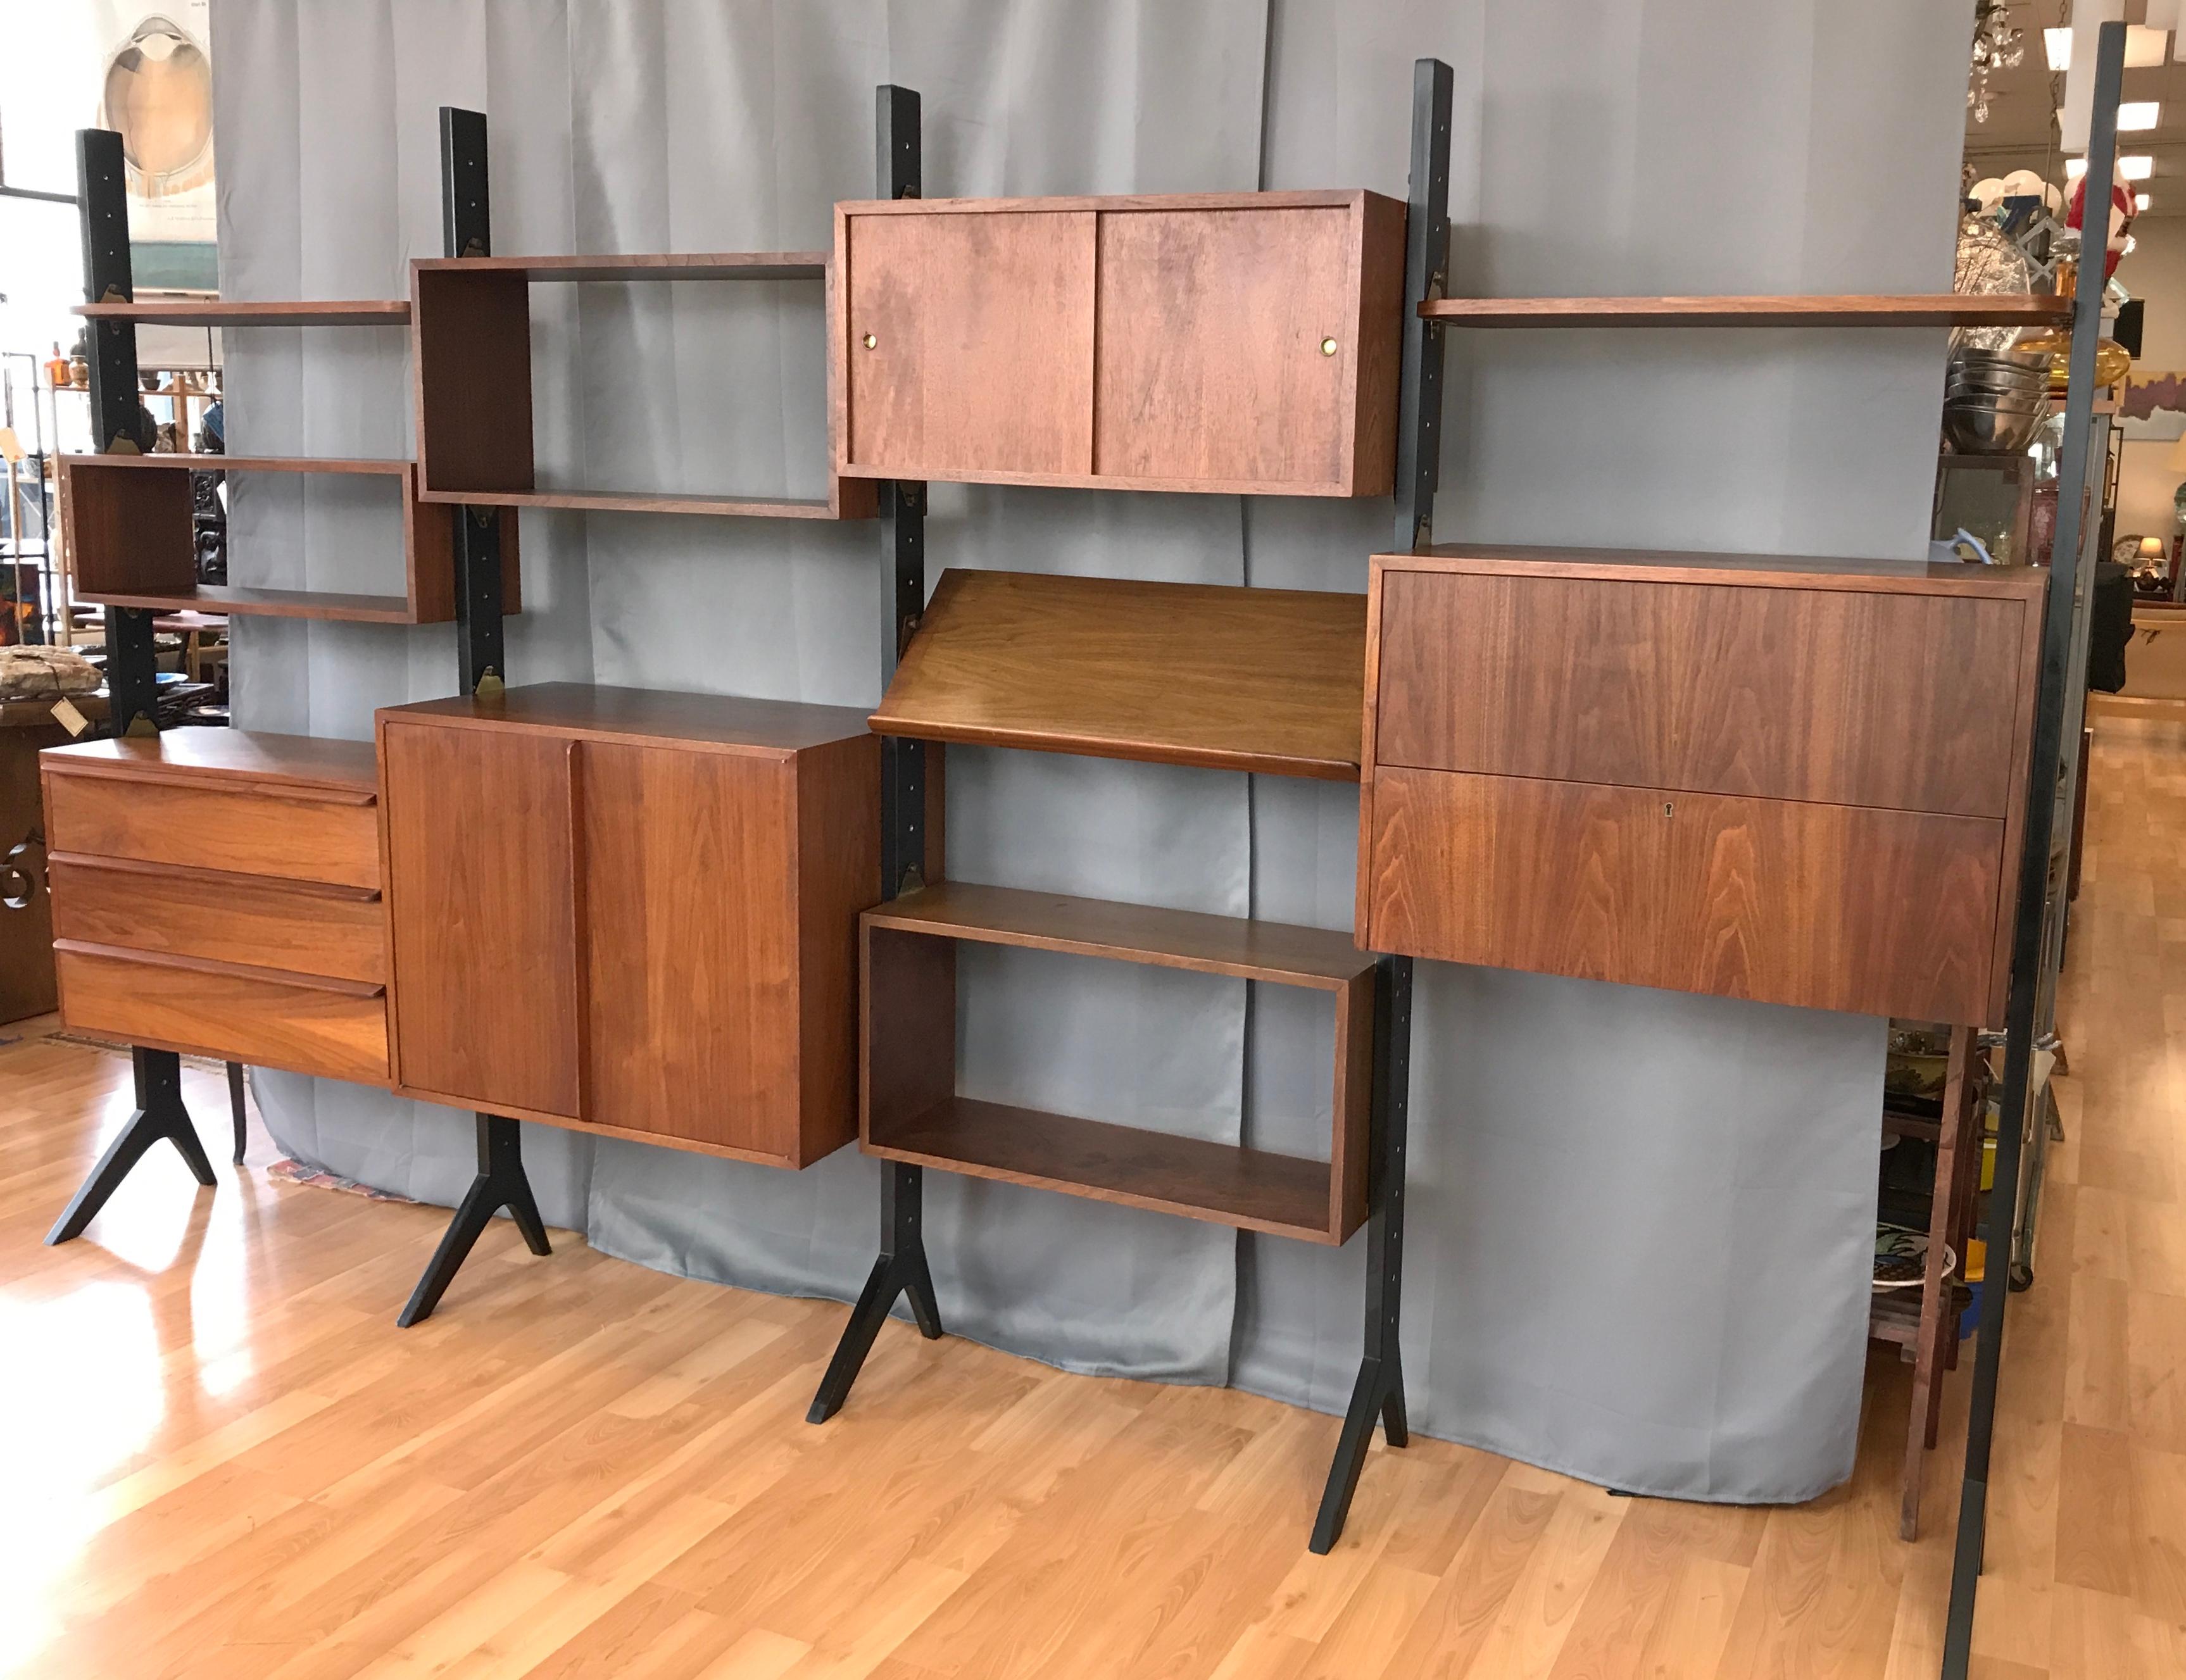 A fantastic looking, super functional, and rather rare mid-century modern Euro Art walnut freestanding four-bay modular storage system by Fritz of California.

Similar in style to both the wall-mounted Omni System by George Nelson and the Royal